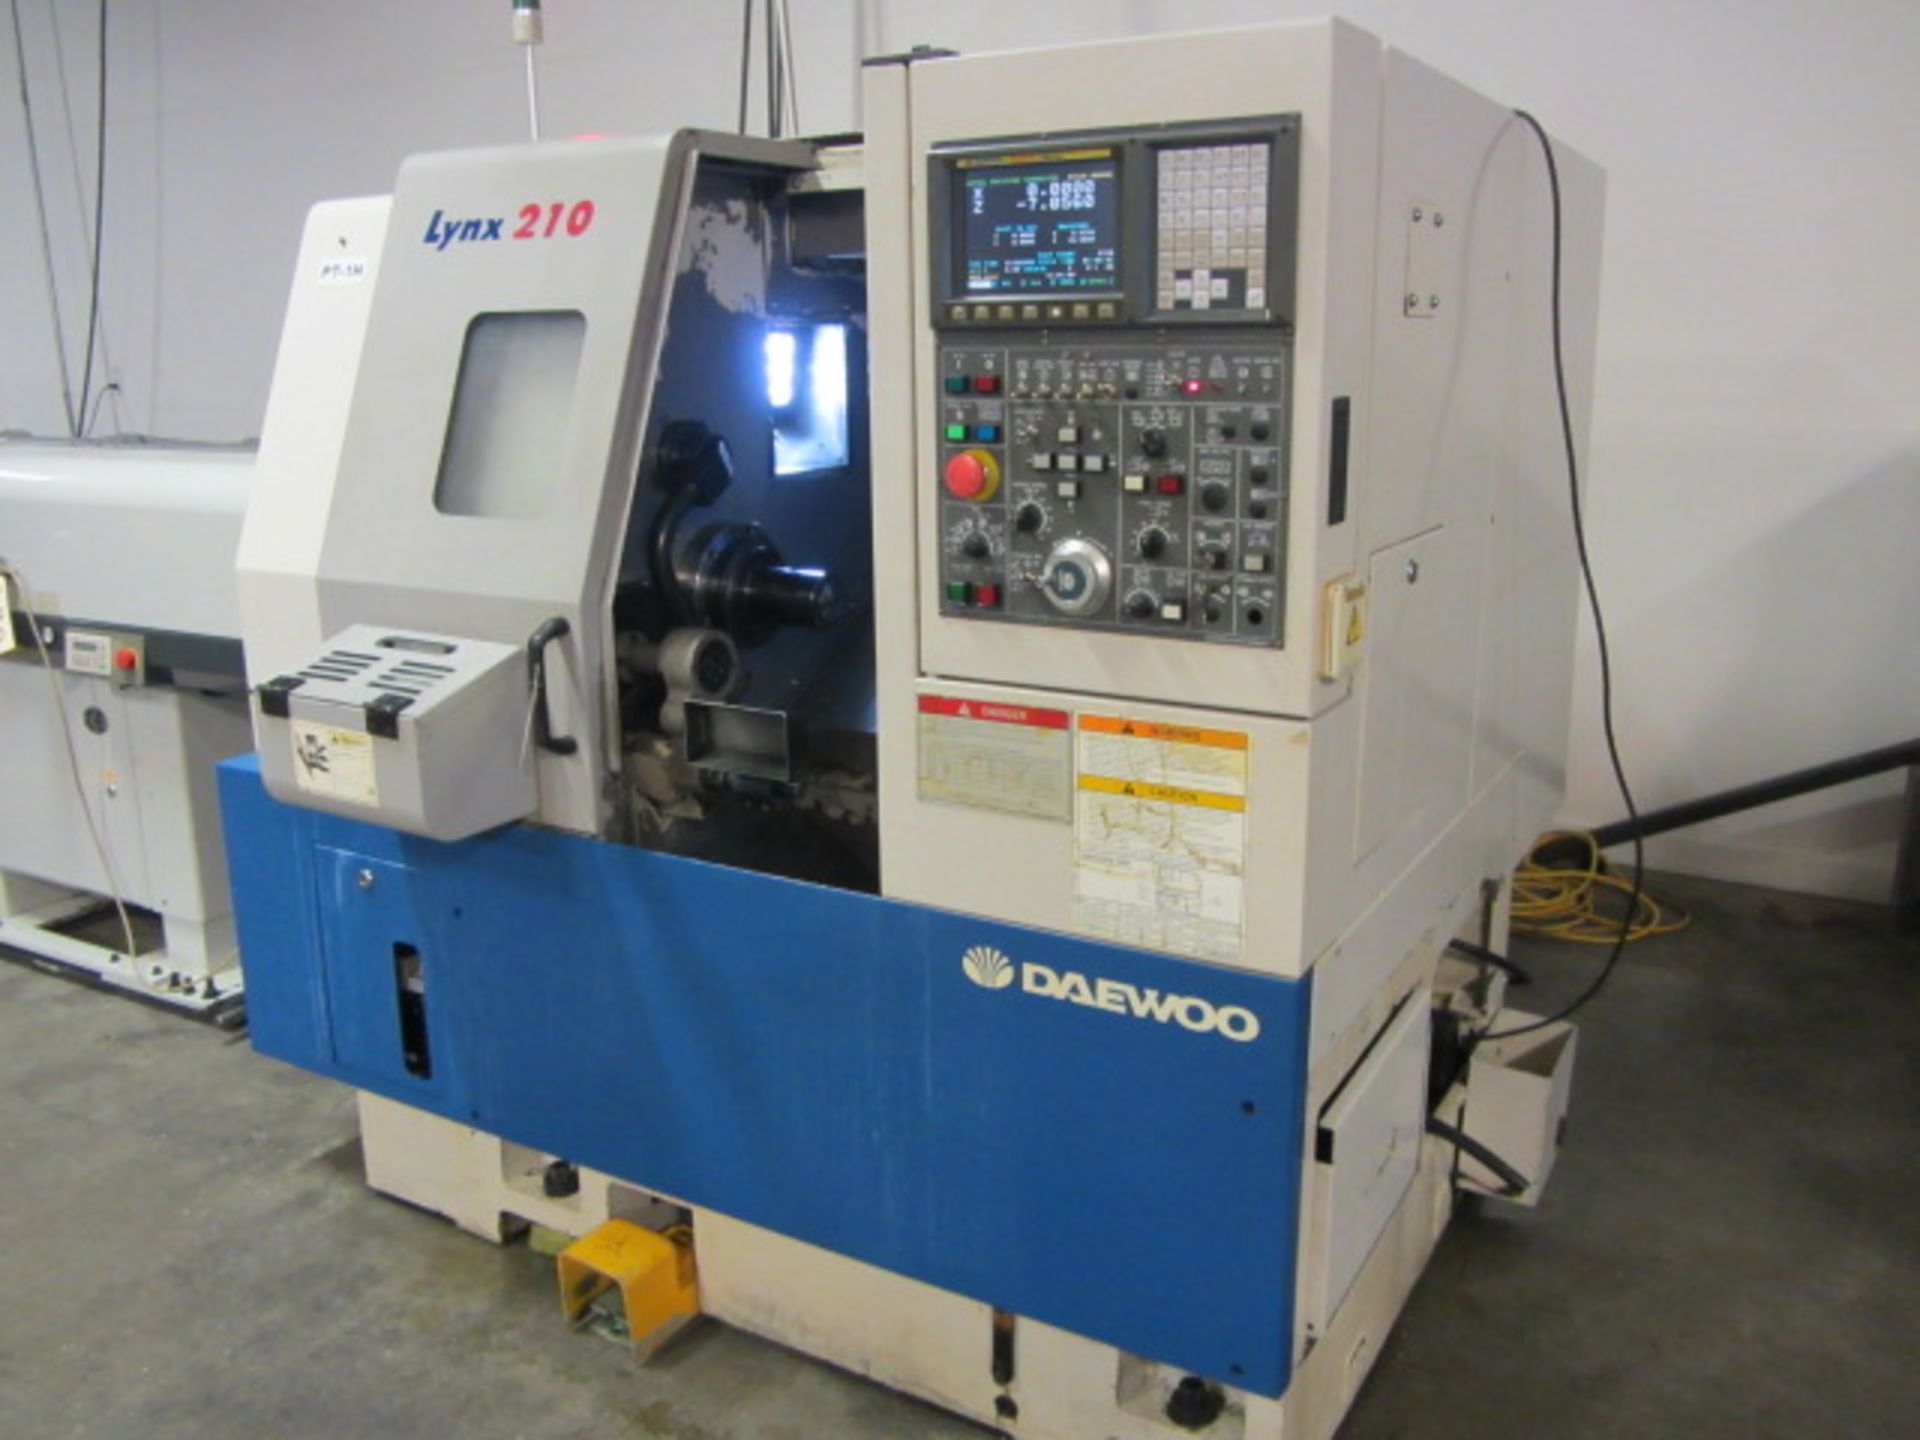 Daewoo Lynx 210A CNC Turning Center with 16C Collet Chuck, Parts Catcher, Fanuc i CNC Control, sn: - Image 6 of 7